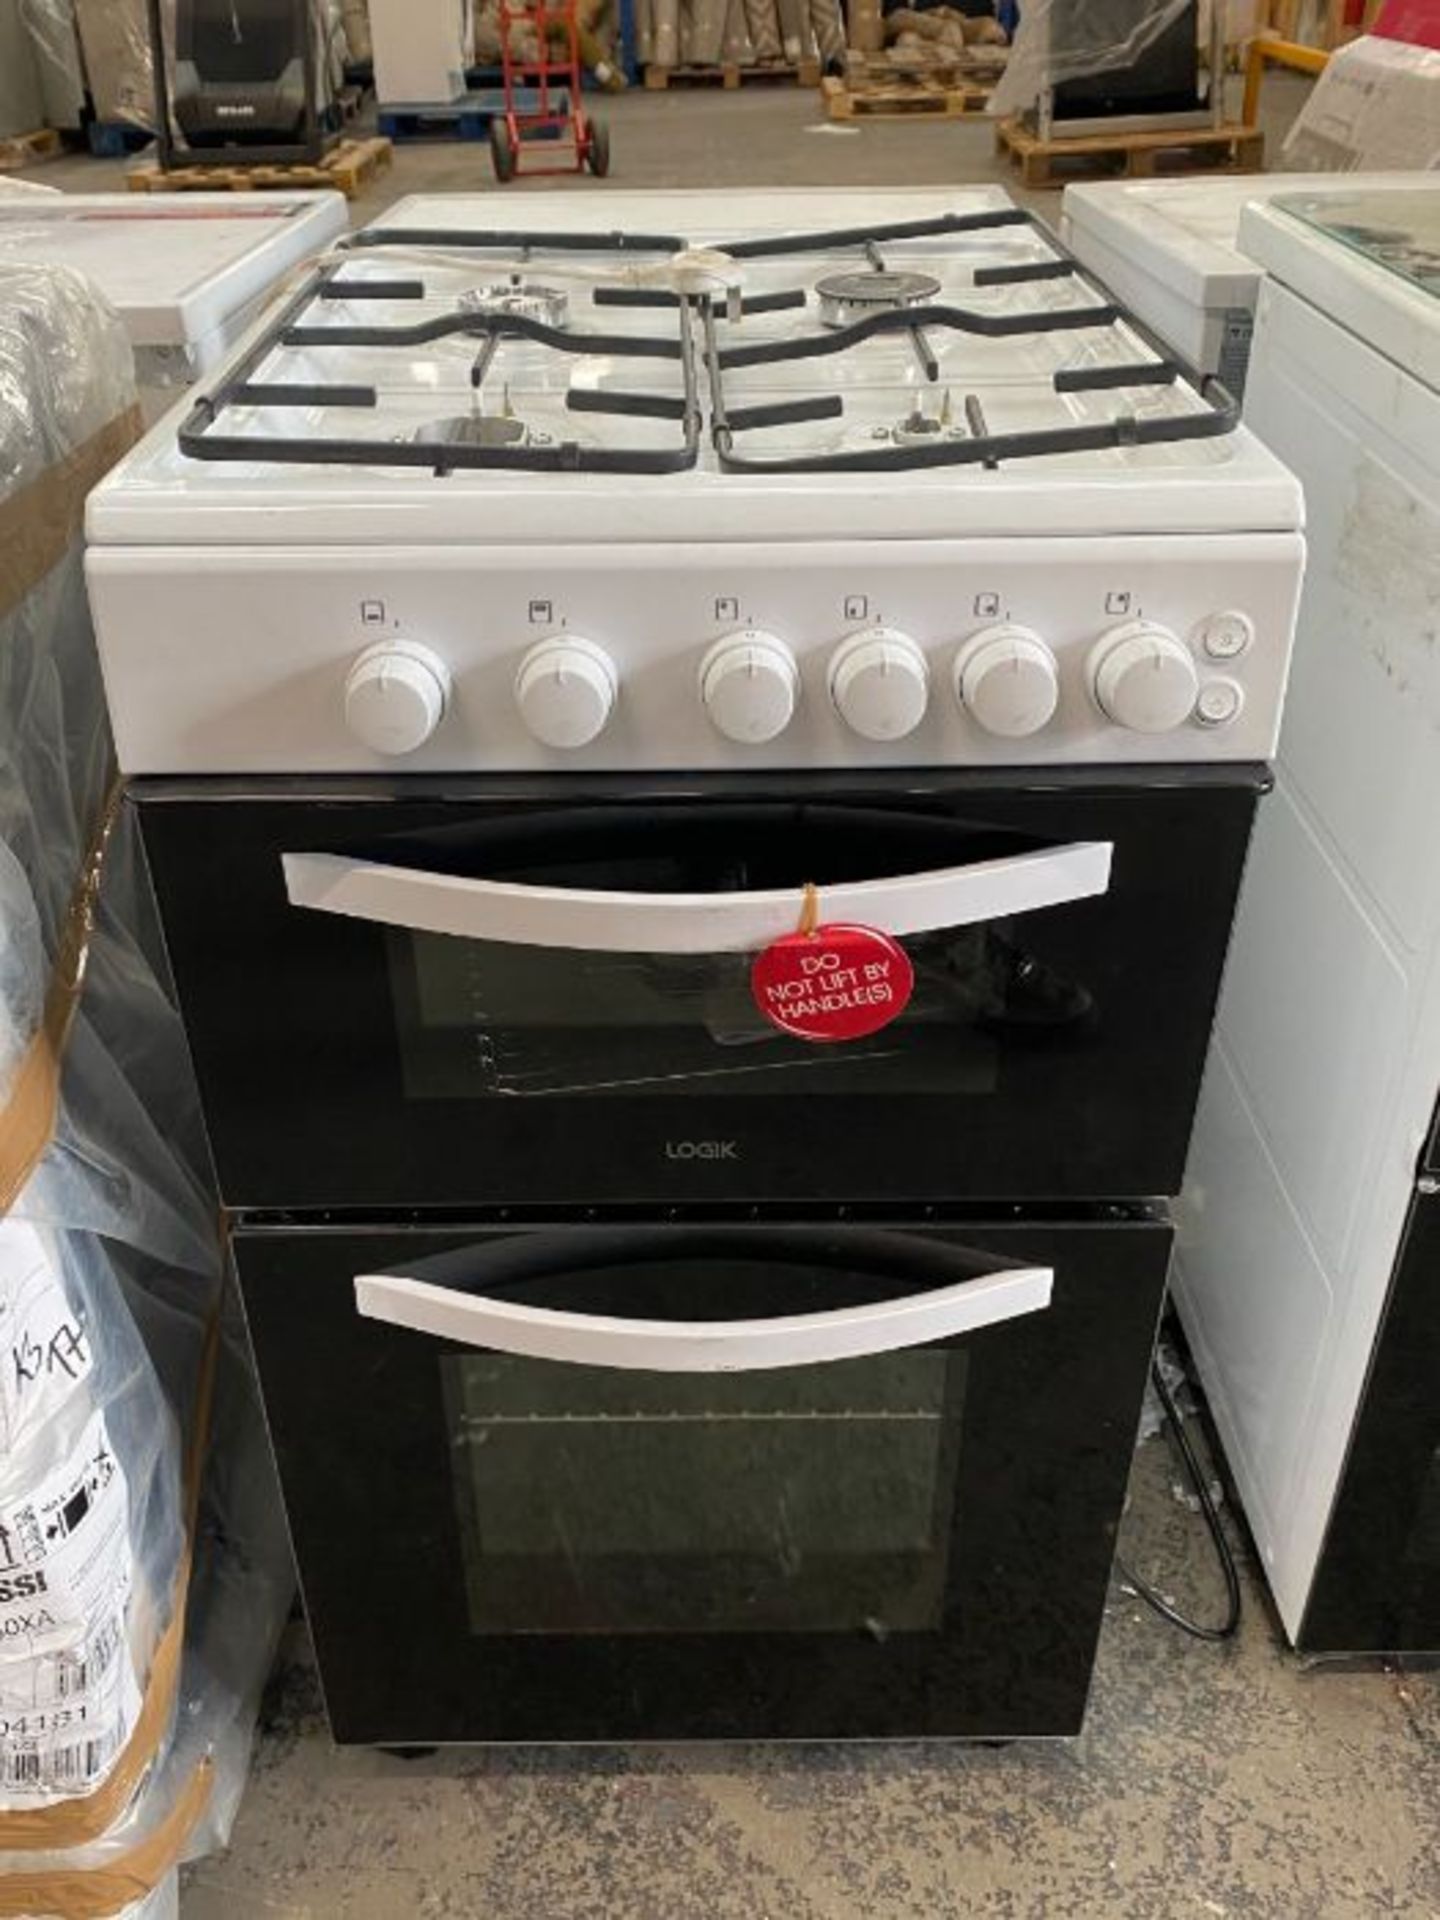 LOGIK LFTC50W16 ELECTRIC COOKER / RRP £289.00 /MISSING BURNER CROWNS AND FLAME HEADS/ UNTESTED